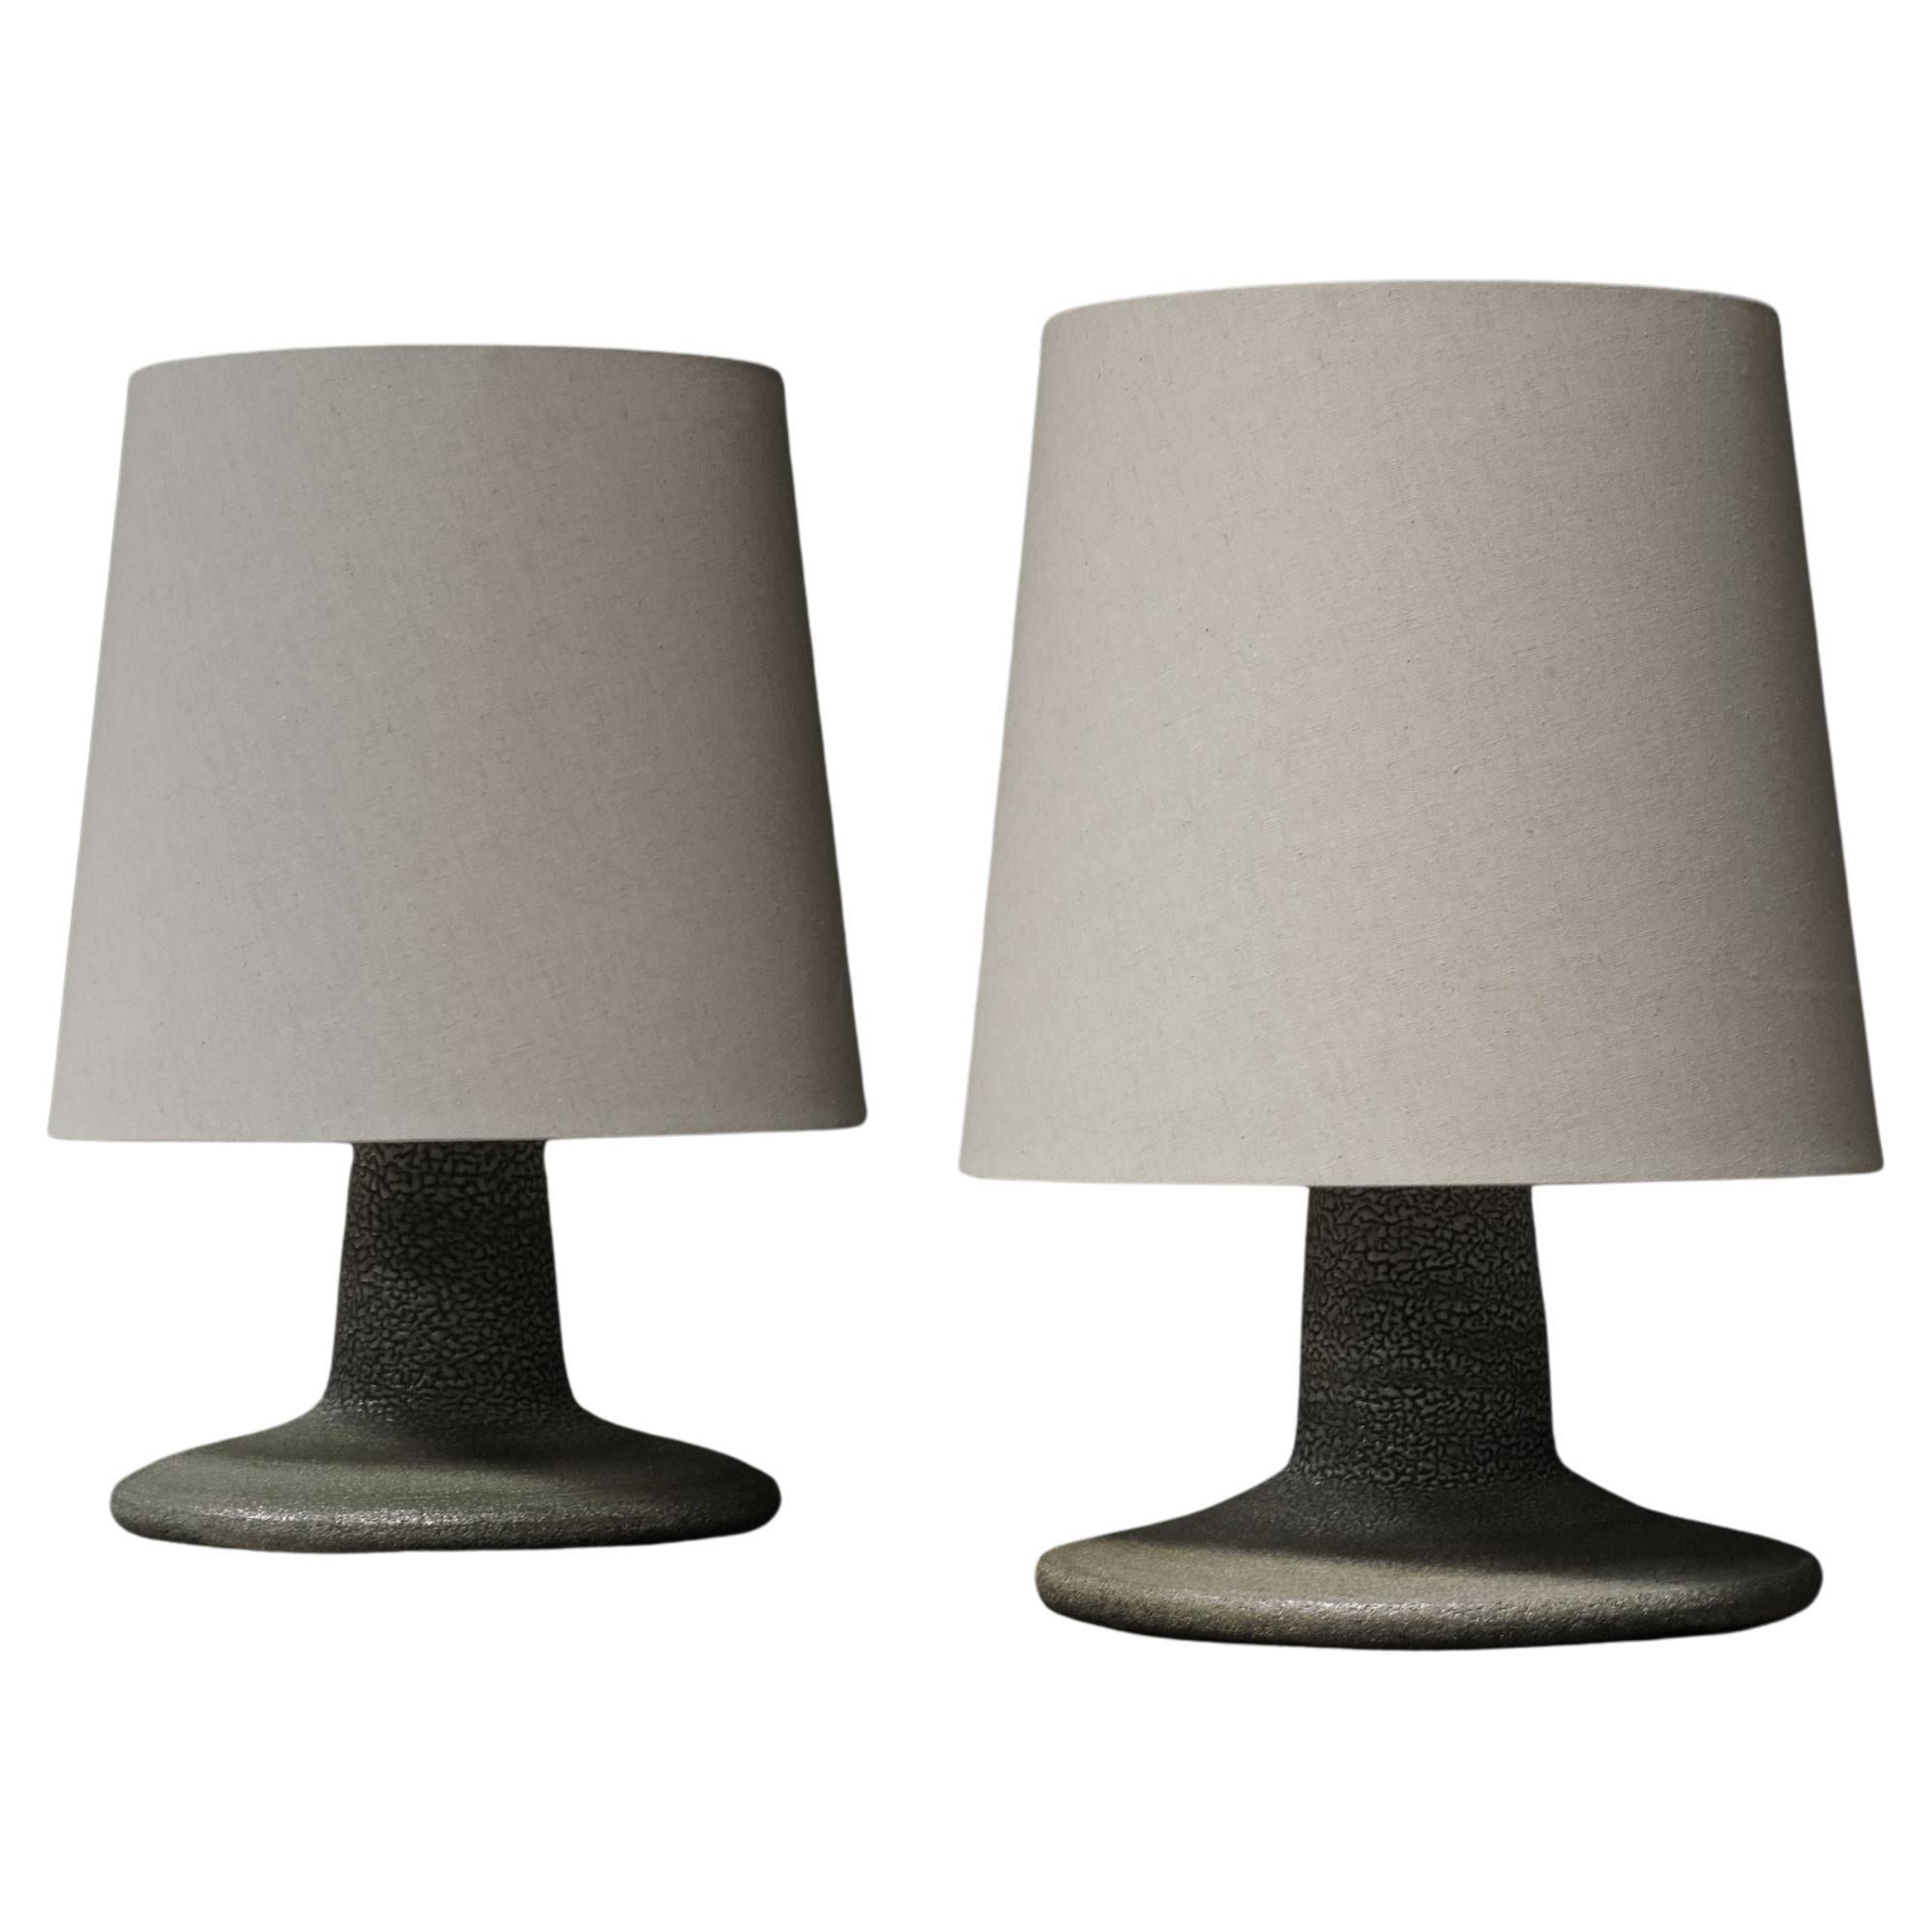 Green Textured Ceramic Table Lamp For Sale